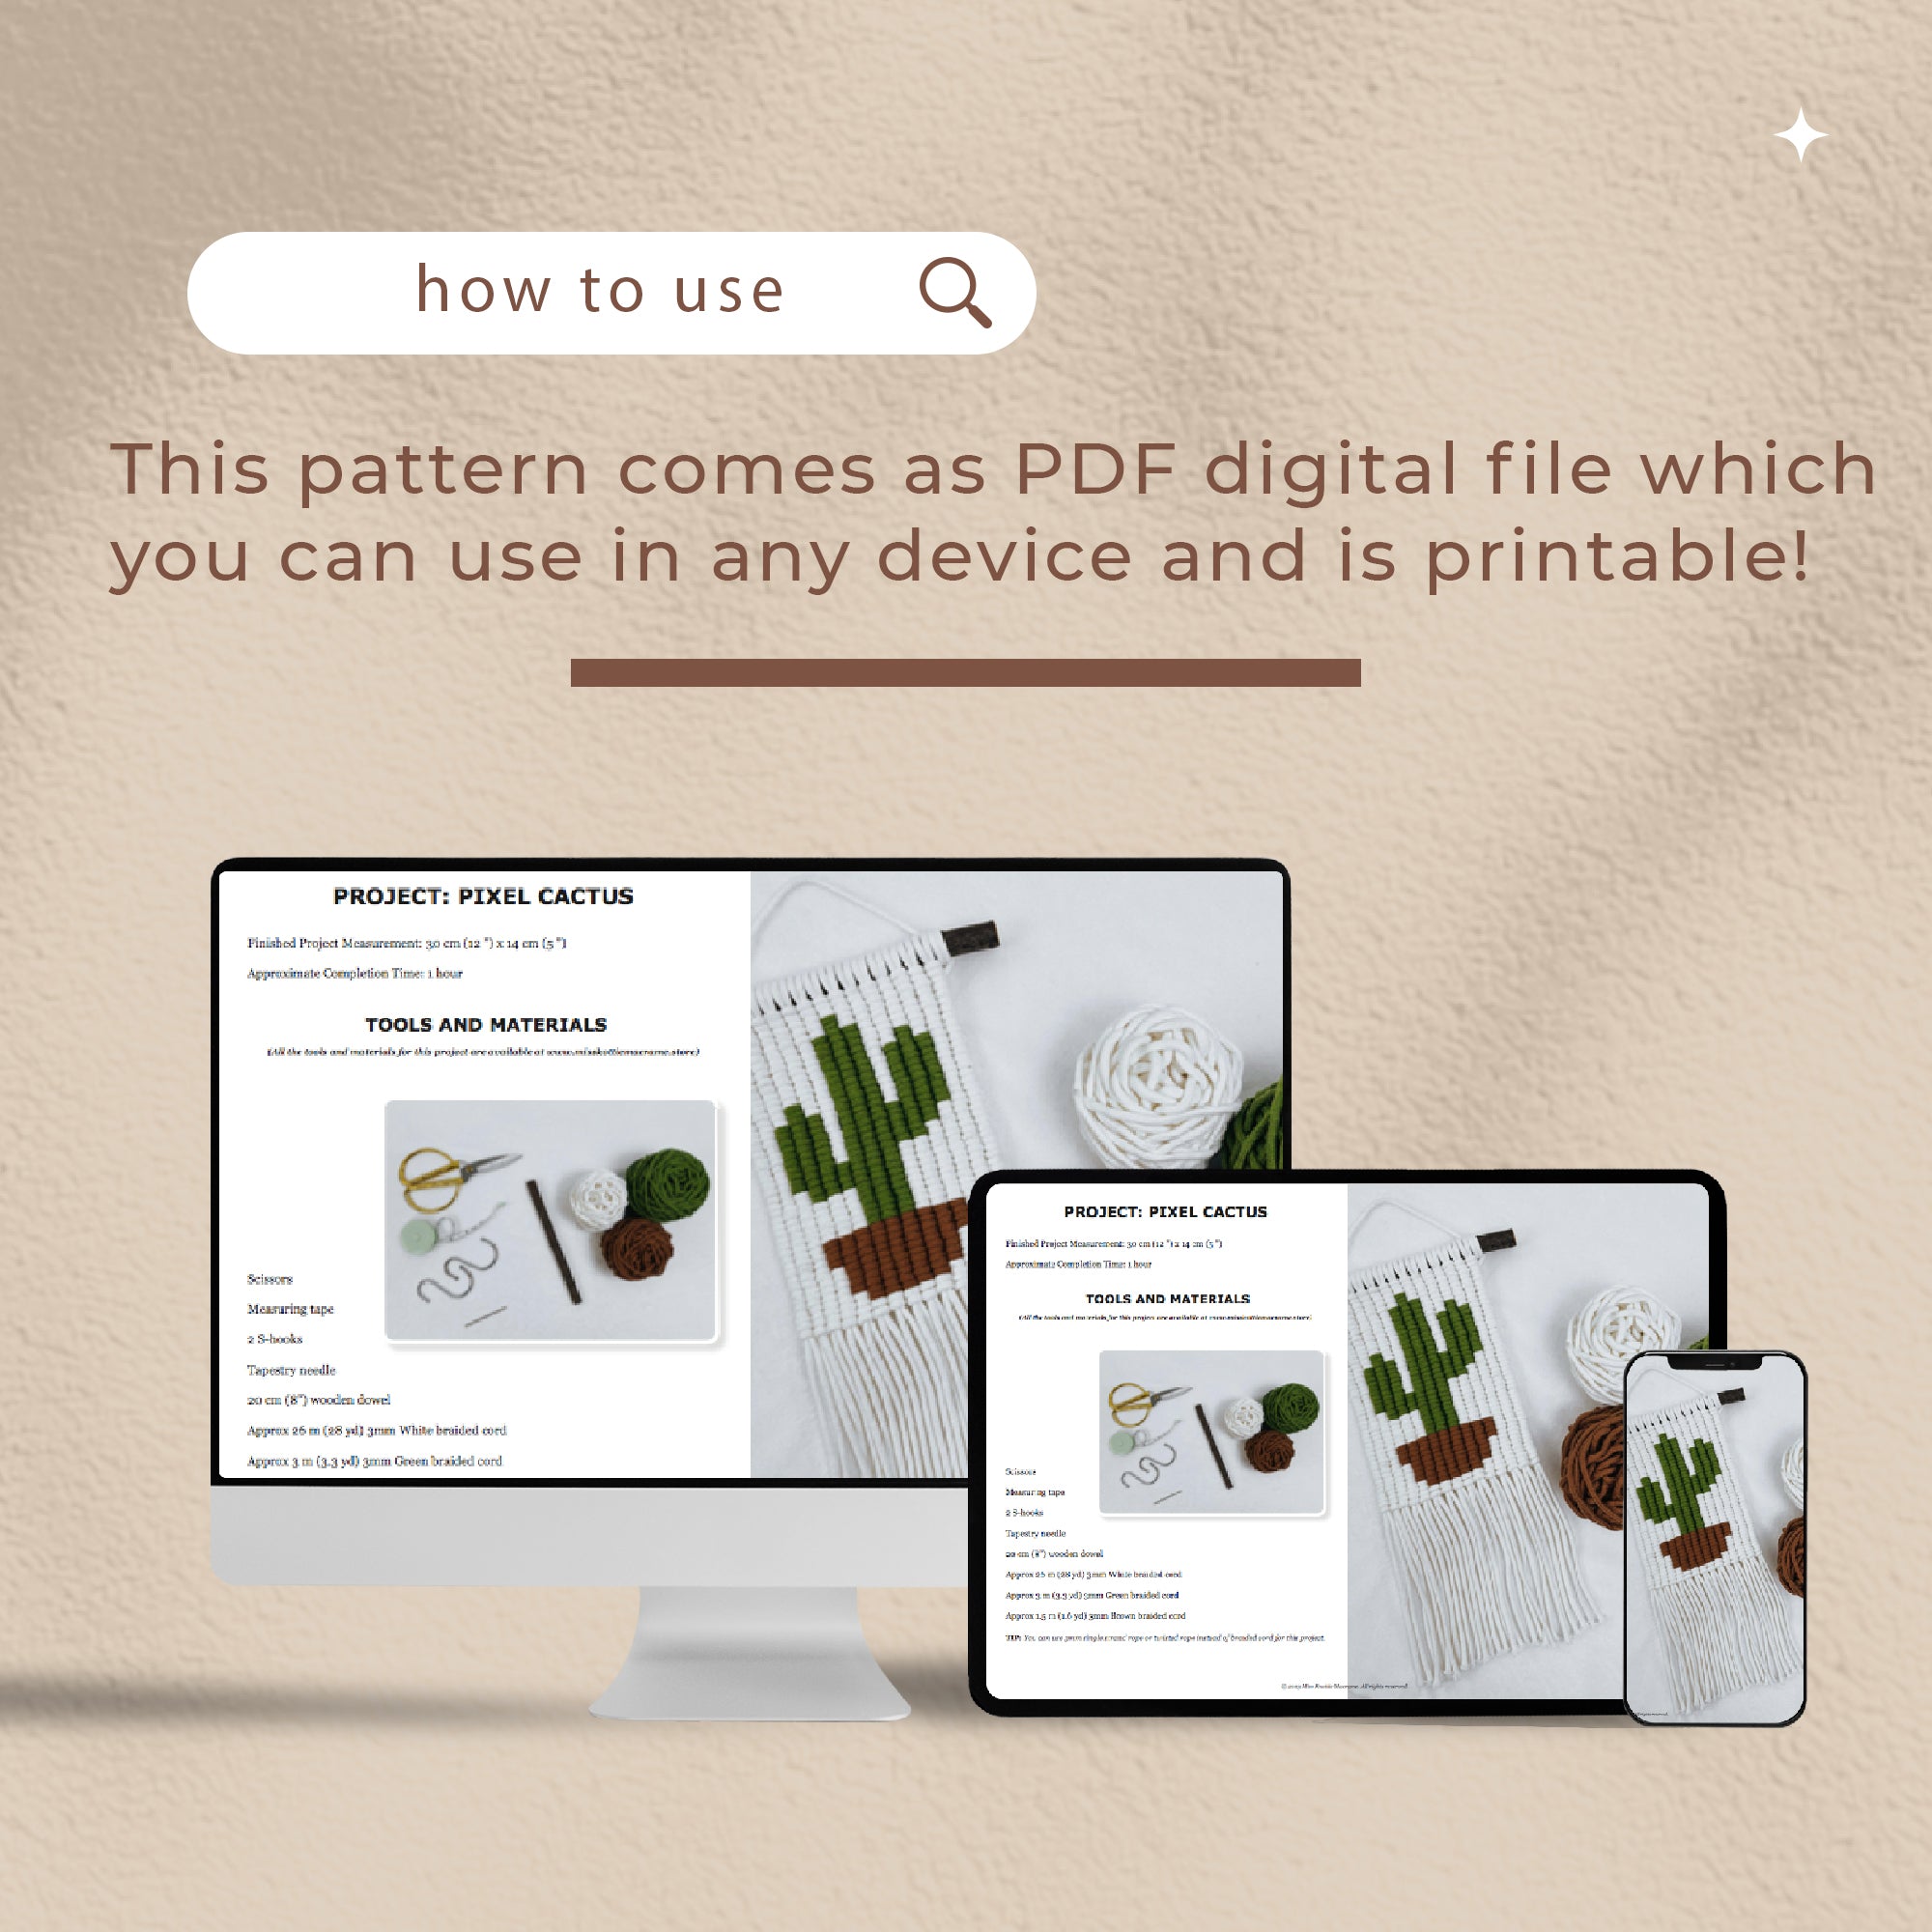 Cactus Pixel Pattern - Digital PDF and Knot Guide